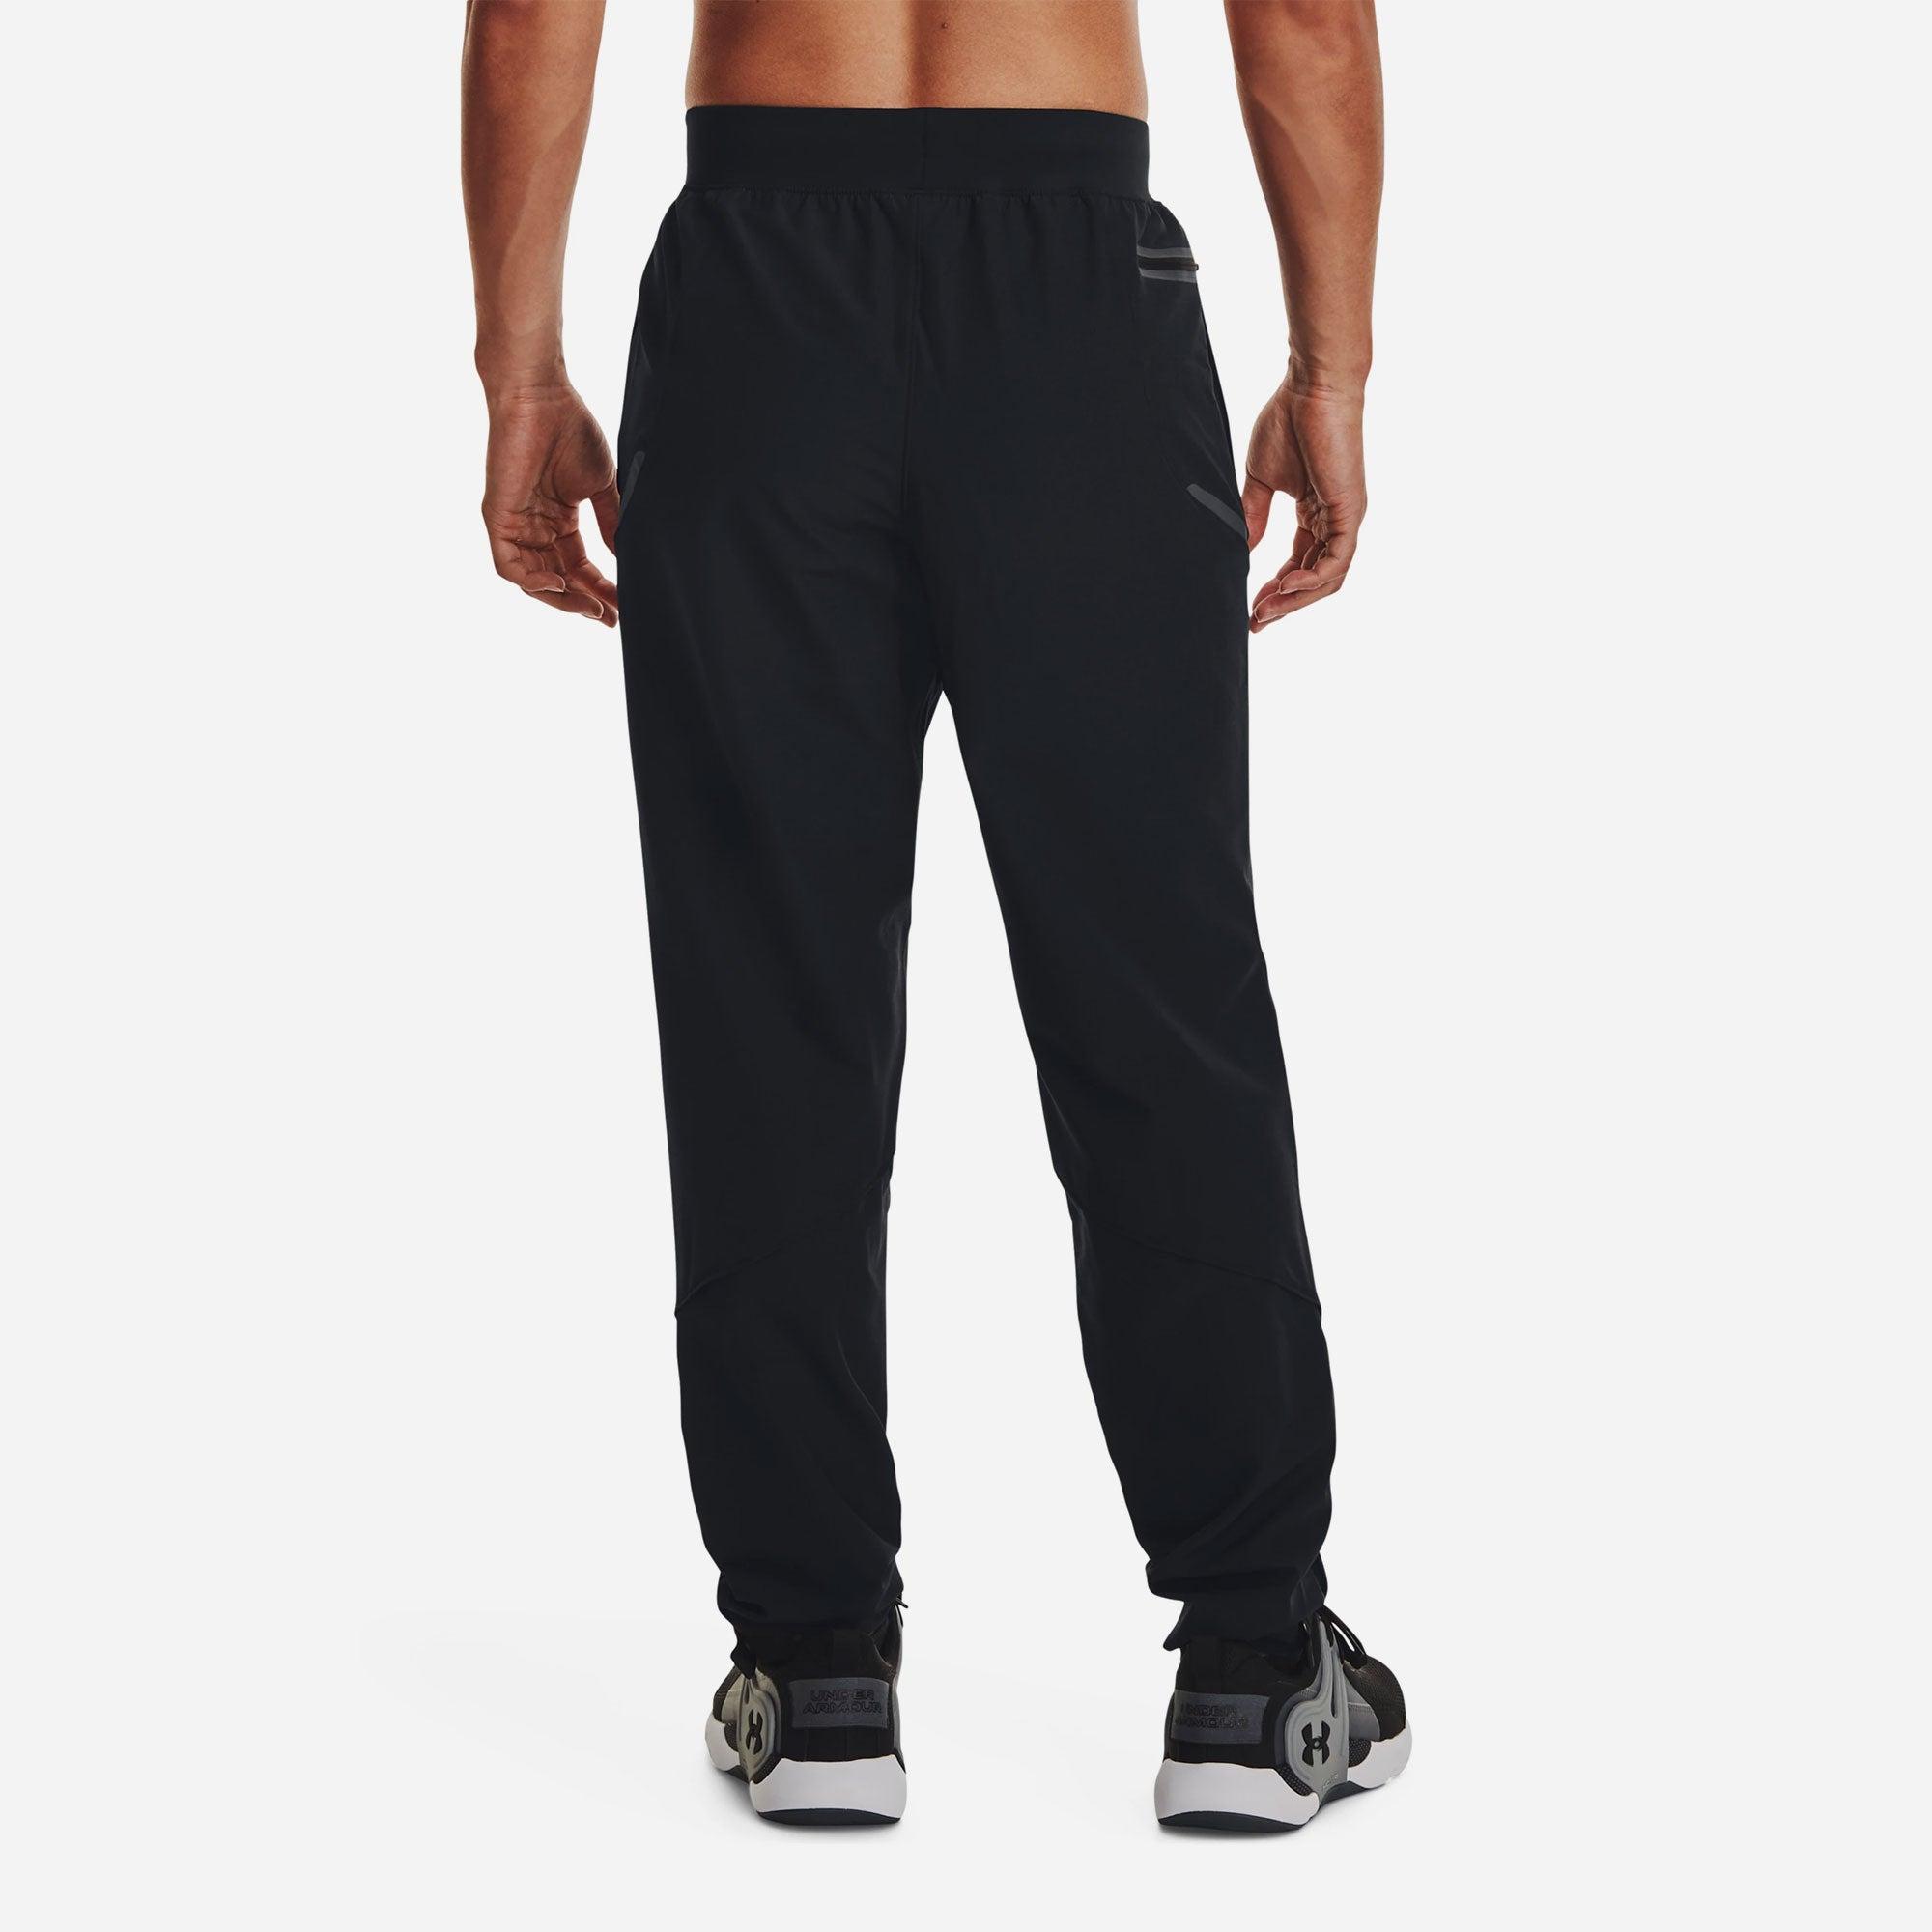 Quần dài thể thao nam Under Armour Unstoppable Brushed - 1373789-001